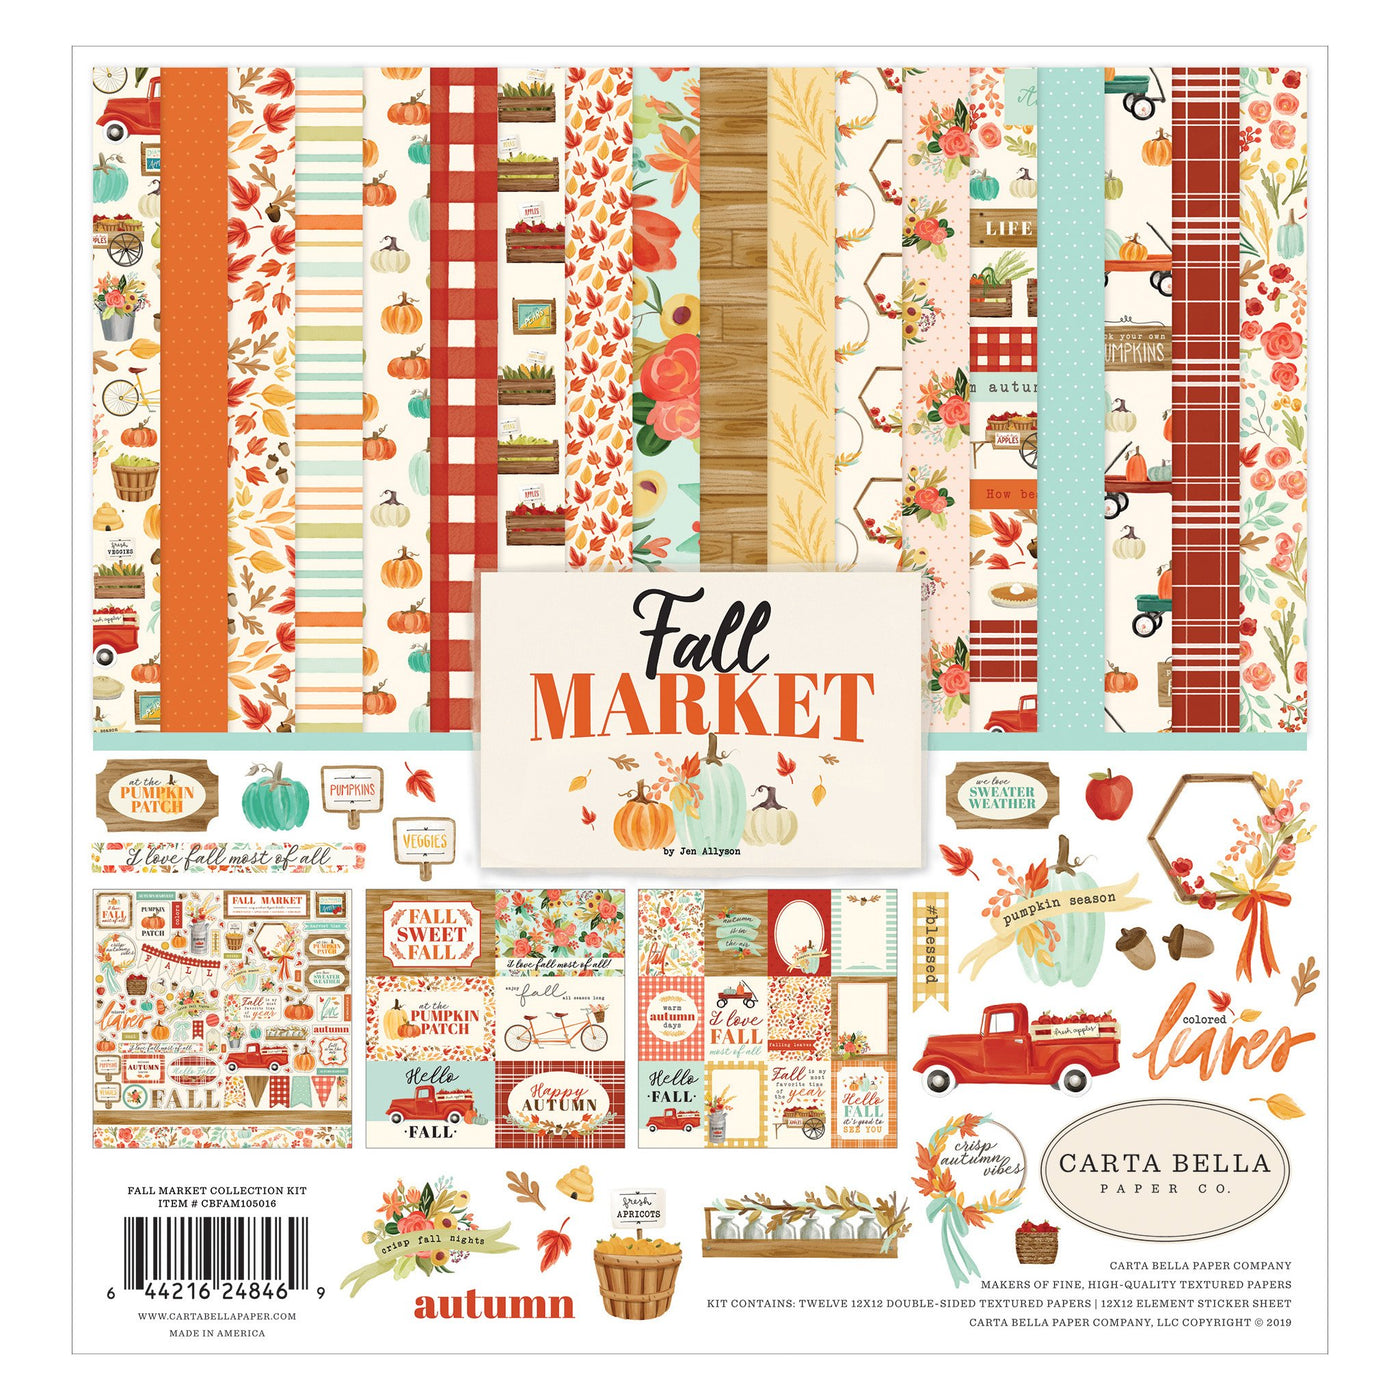 Fall Market Collection Kit from Carta Bella for fine autumn paper crafting